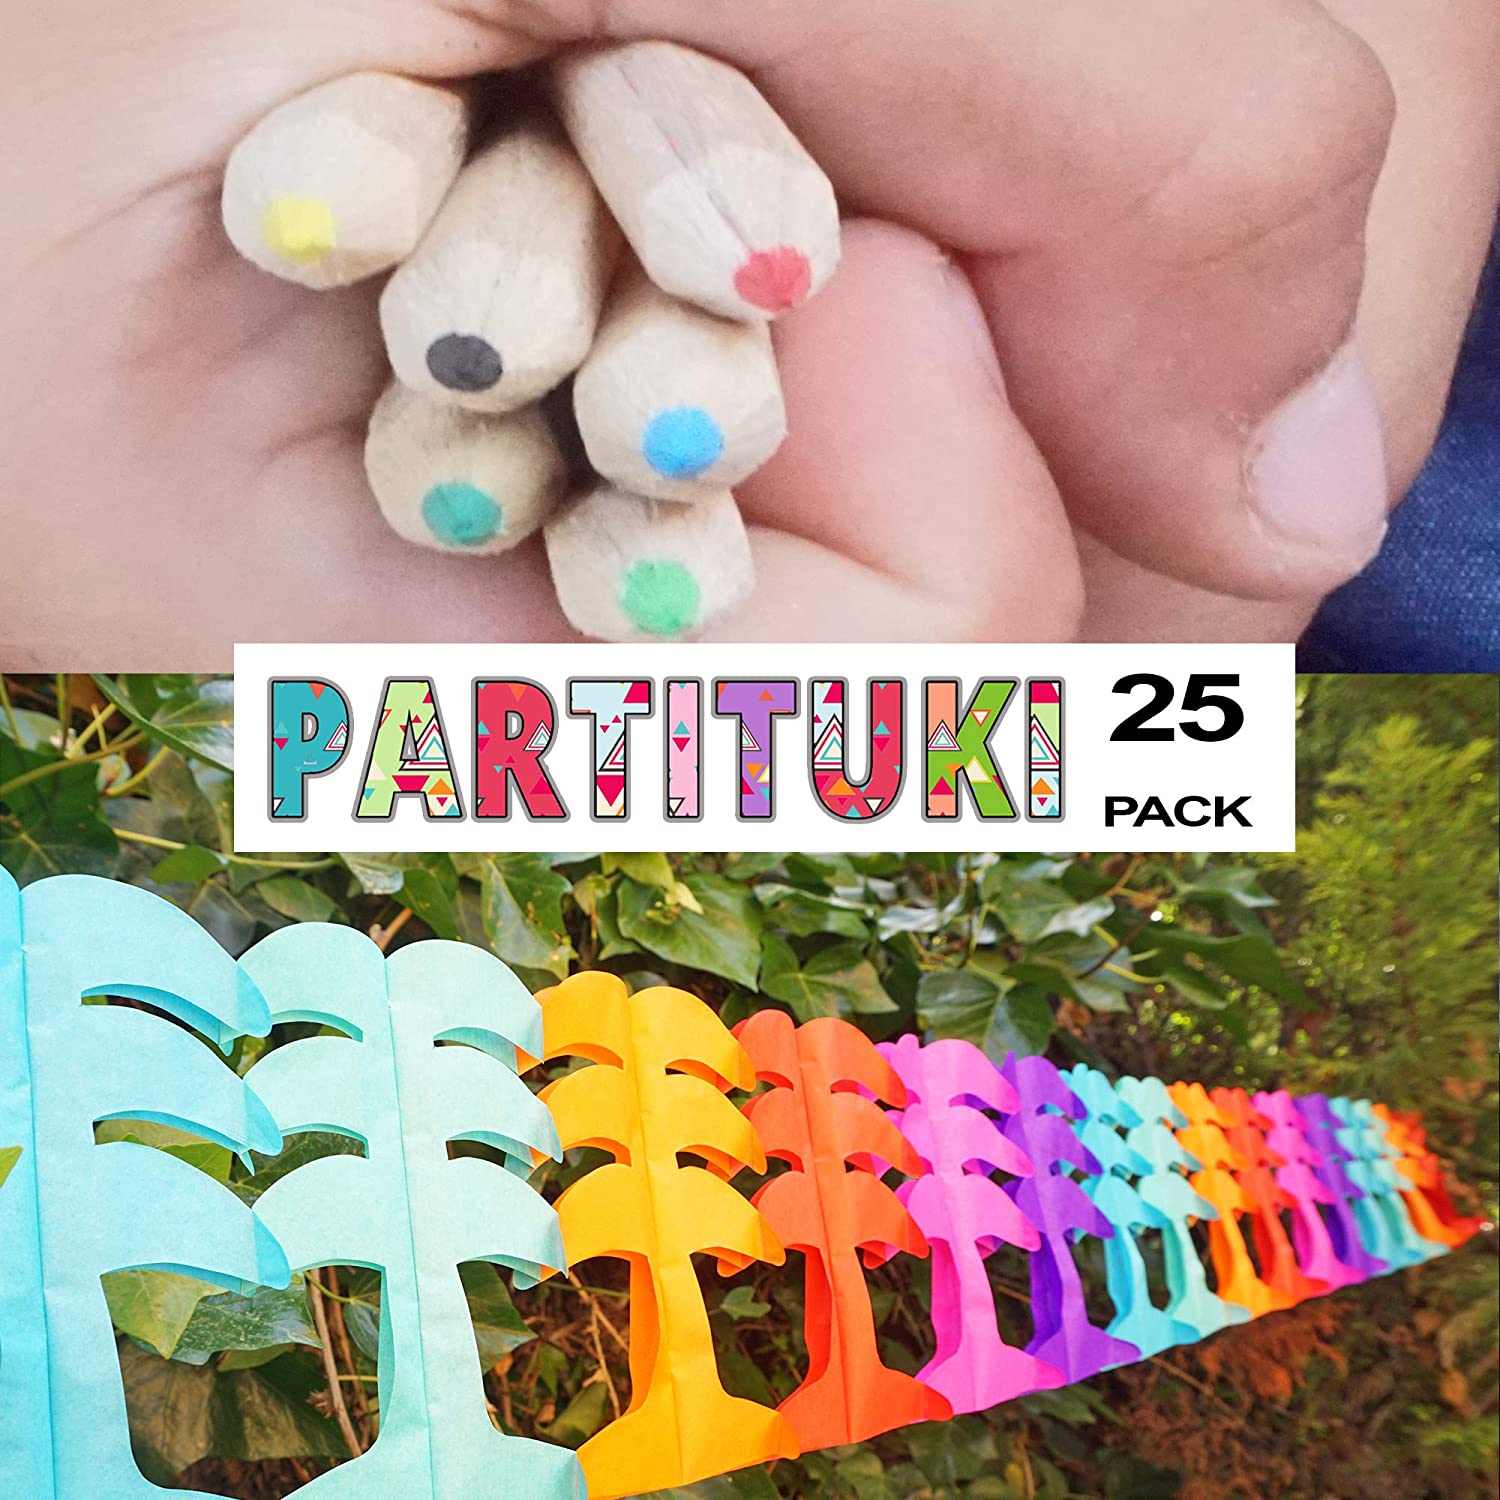 Include a 3mts Garland for Decoration Enjoy painting. Partituki 25 Sets of Colored Pencils for Kids Make your party the funniest